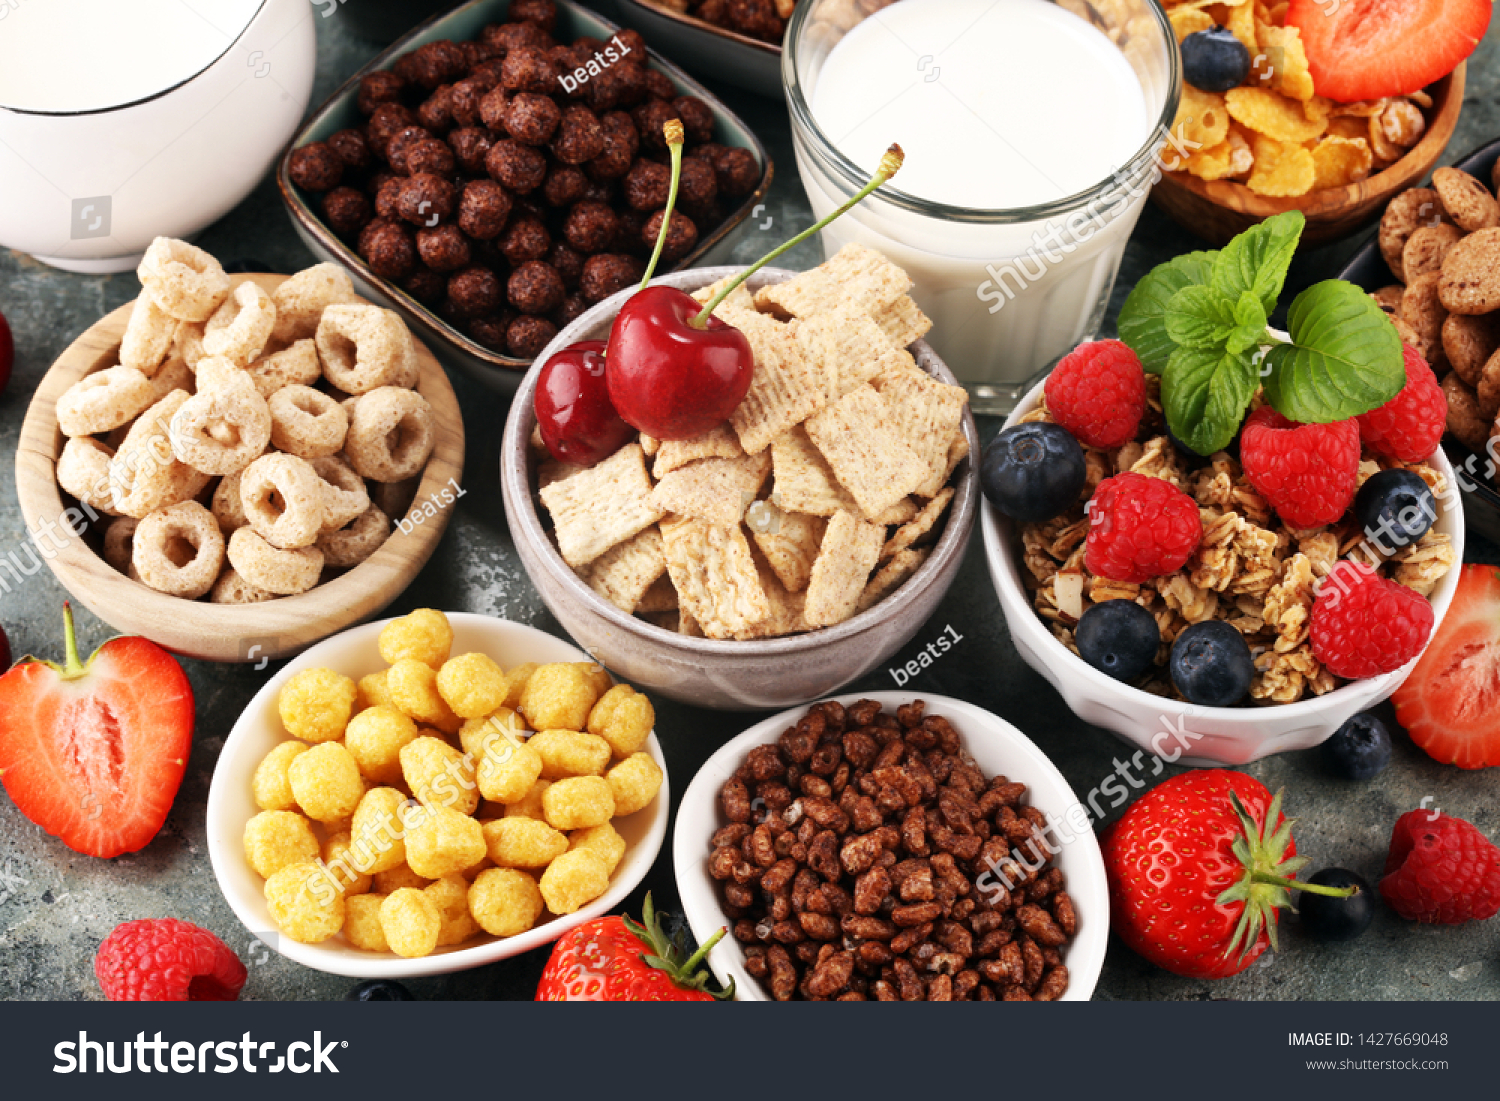 Cereal. Bowls of various cereals, fruits and milk for breakfast. Muesli with variety of kids cereals. #1427669048